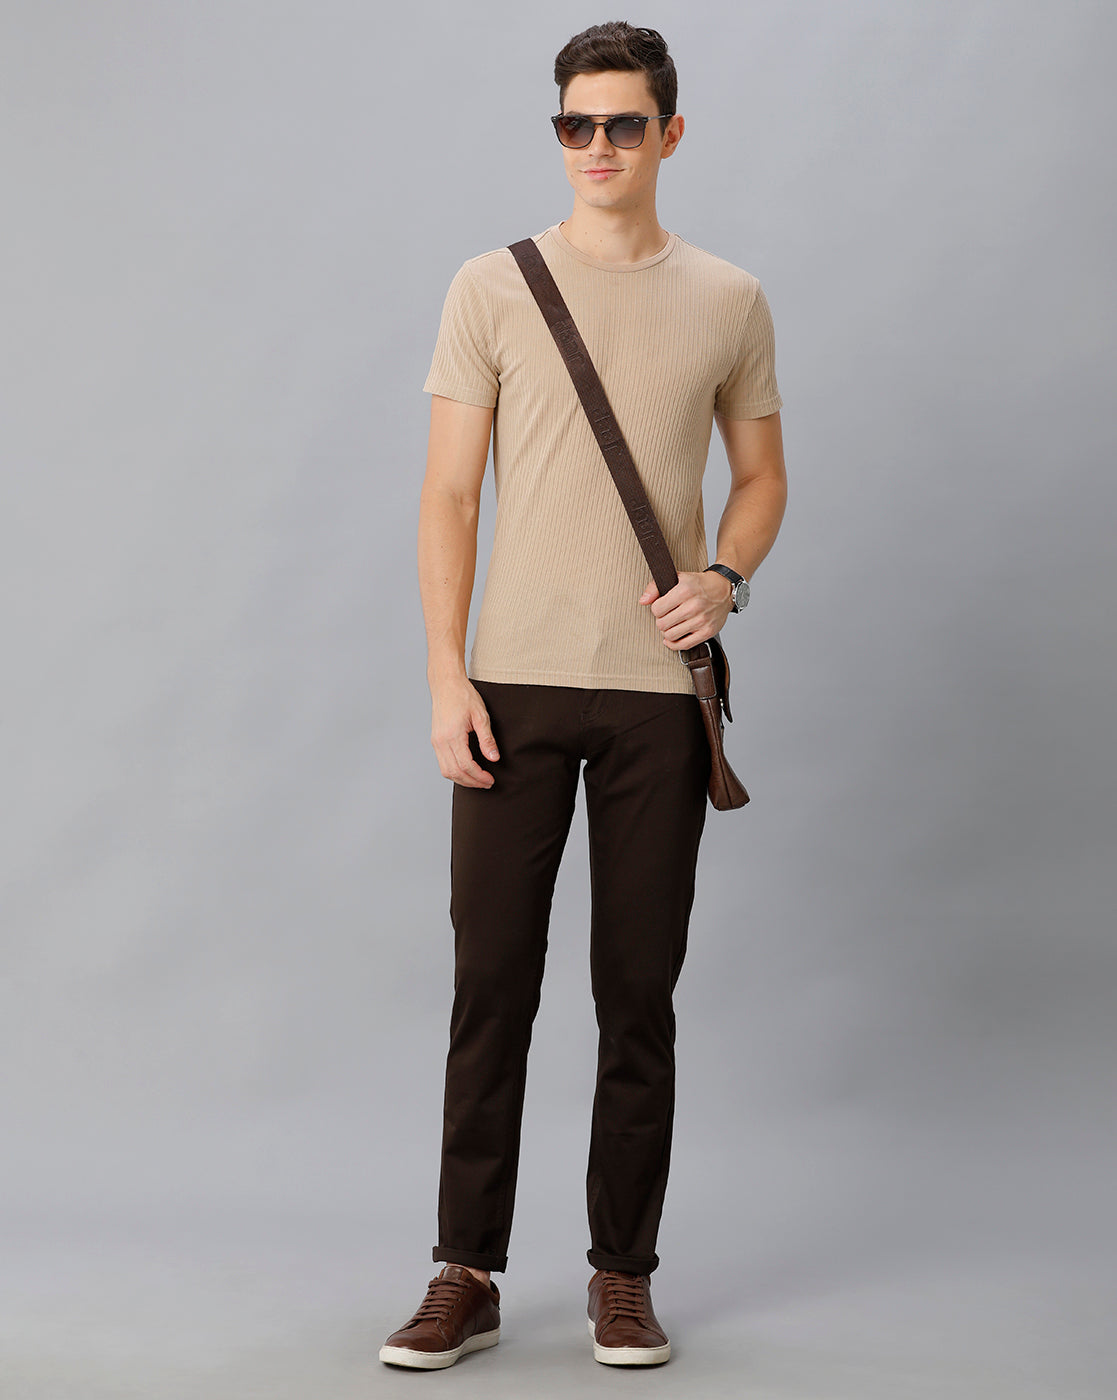 Dark Brown Solid Casual Cotton Trouser - Double Two